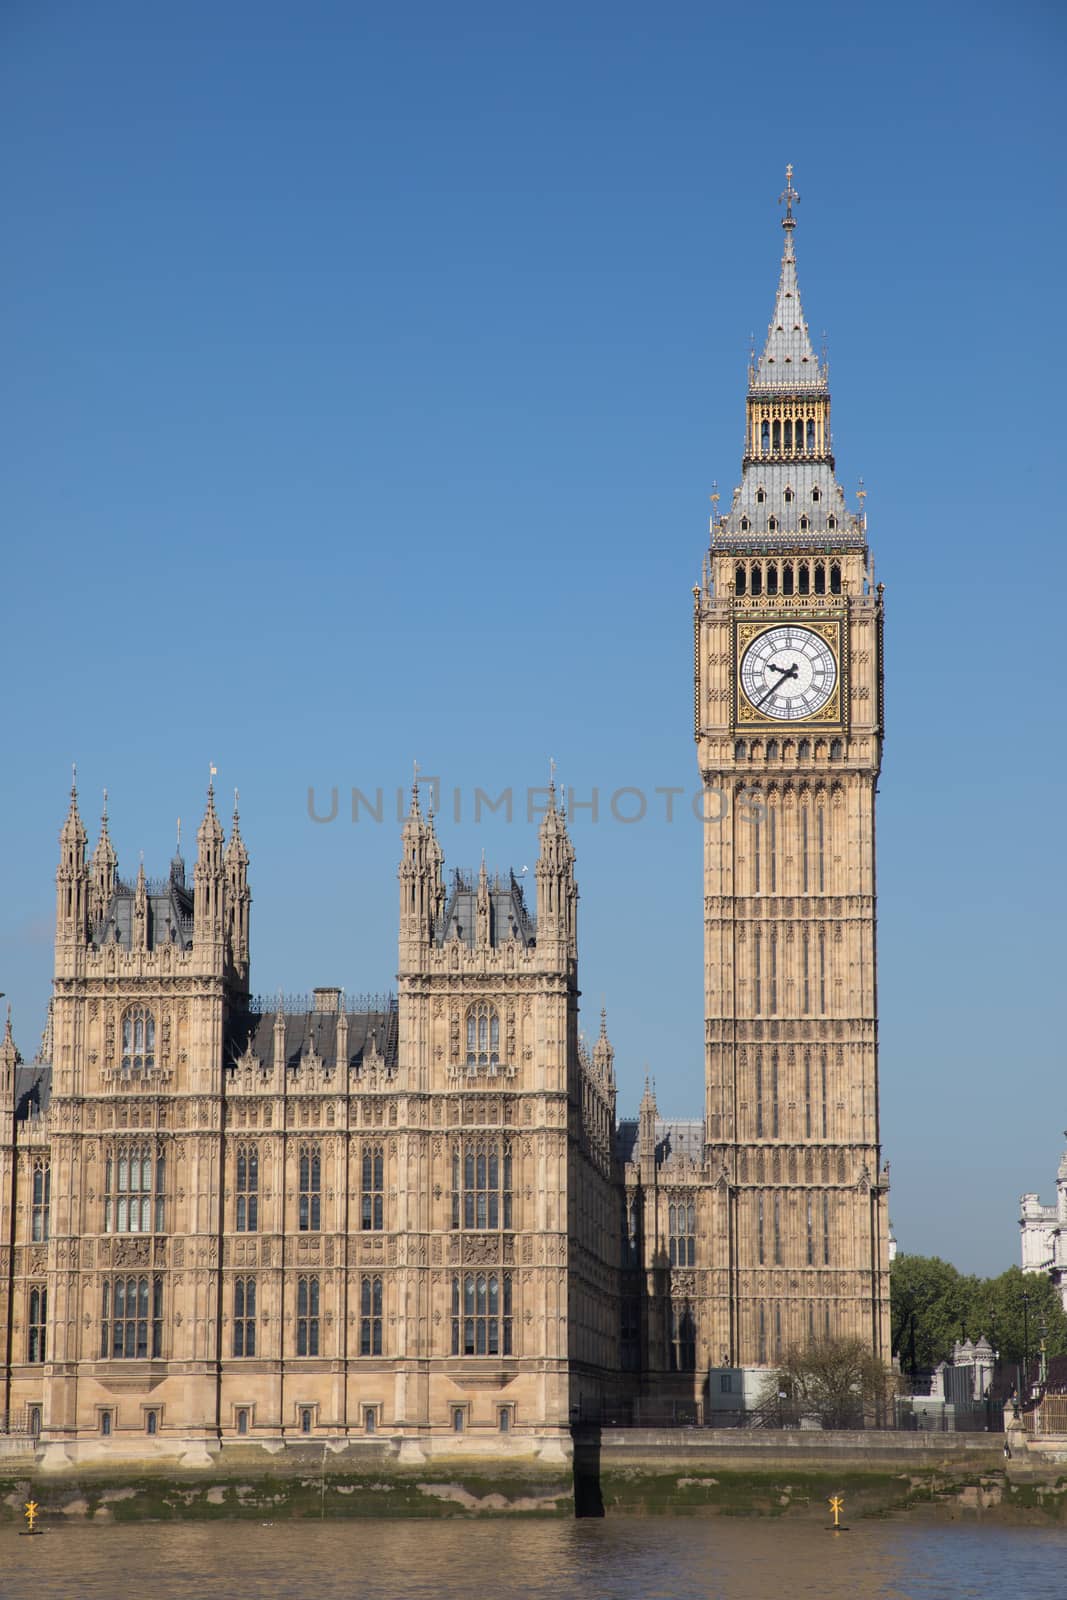 View of Bigben in London England